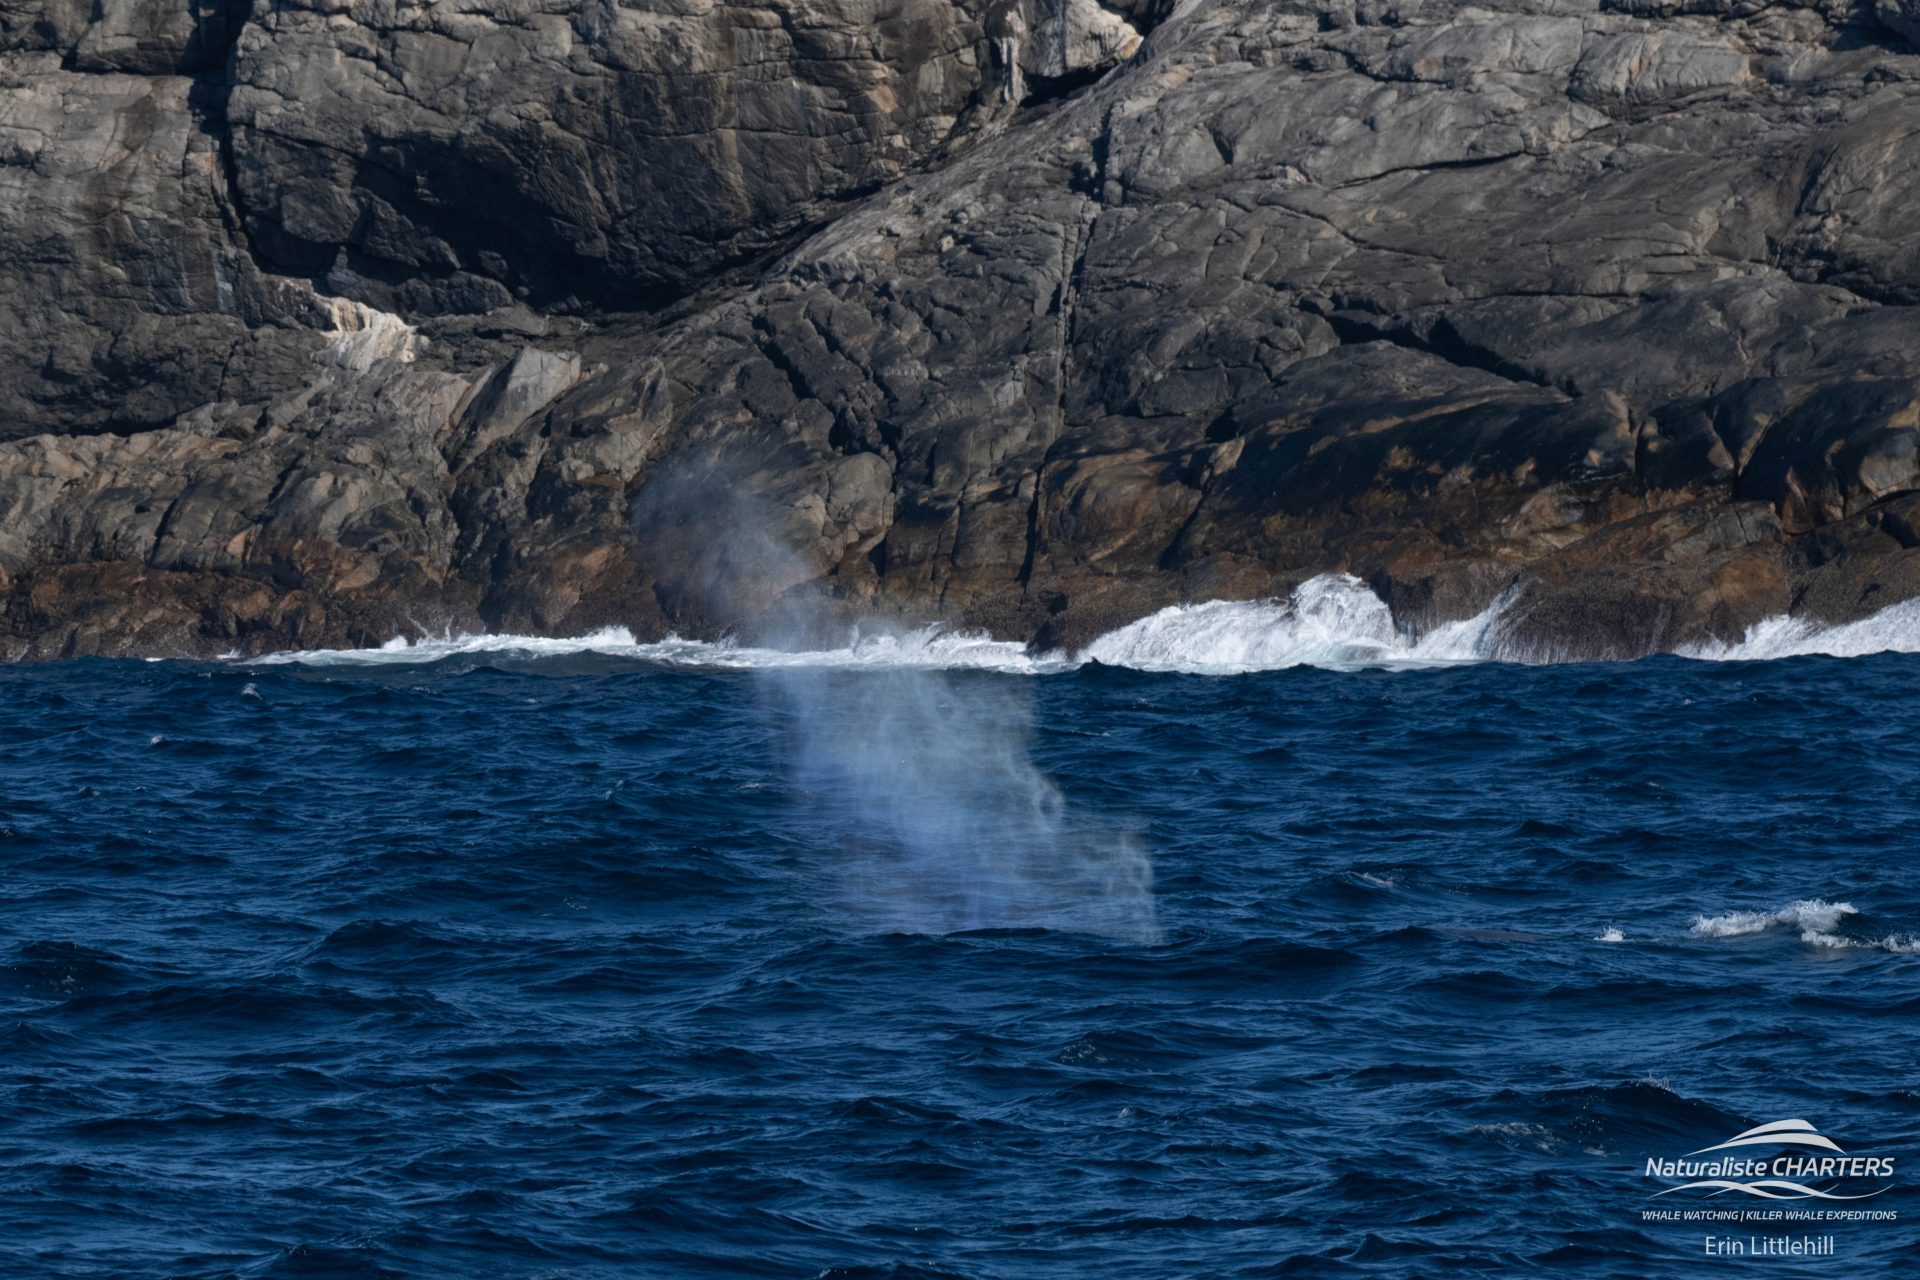 Blue Whale exhale at Point Henry